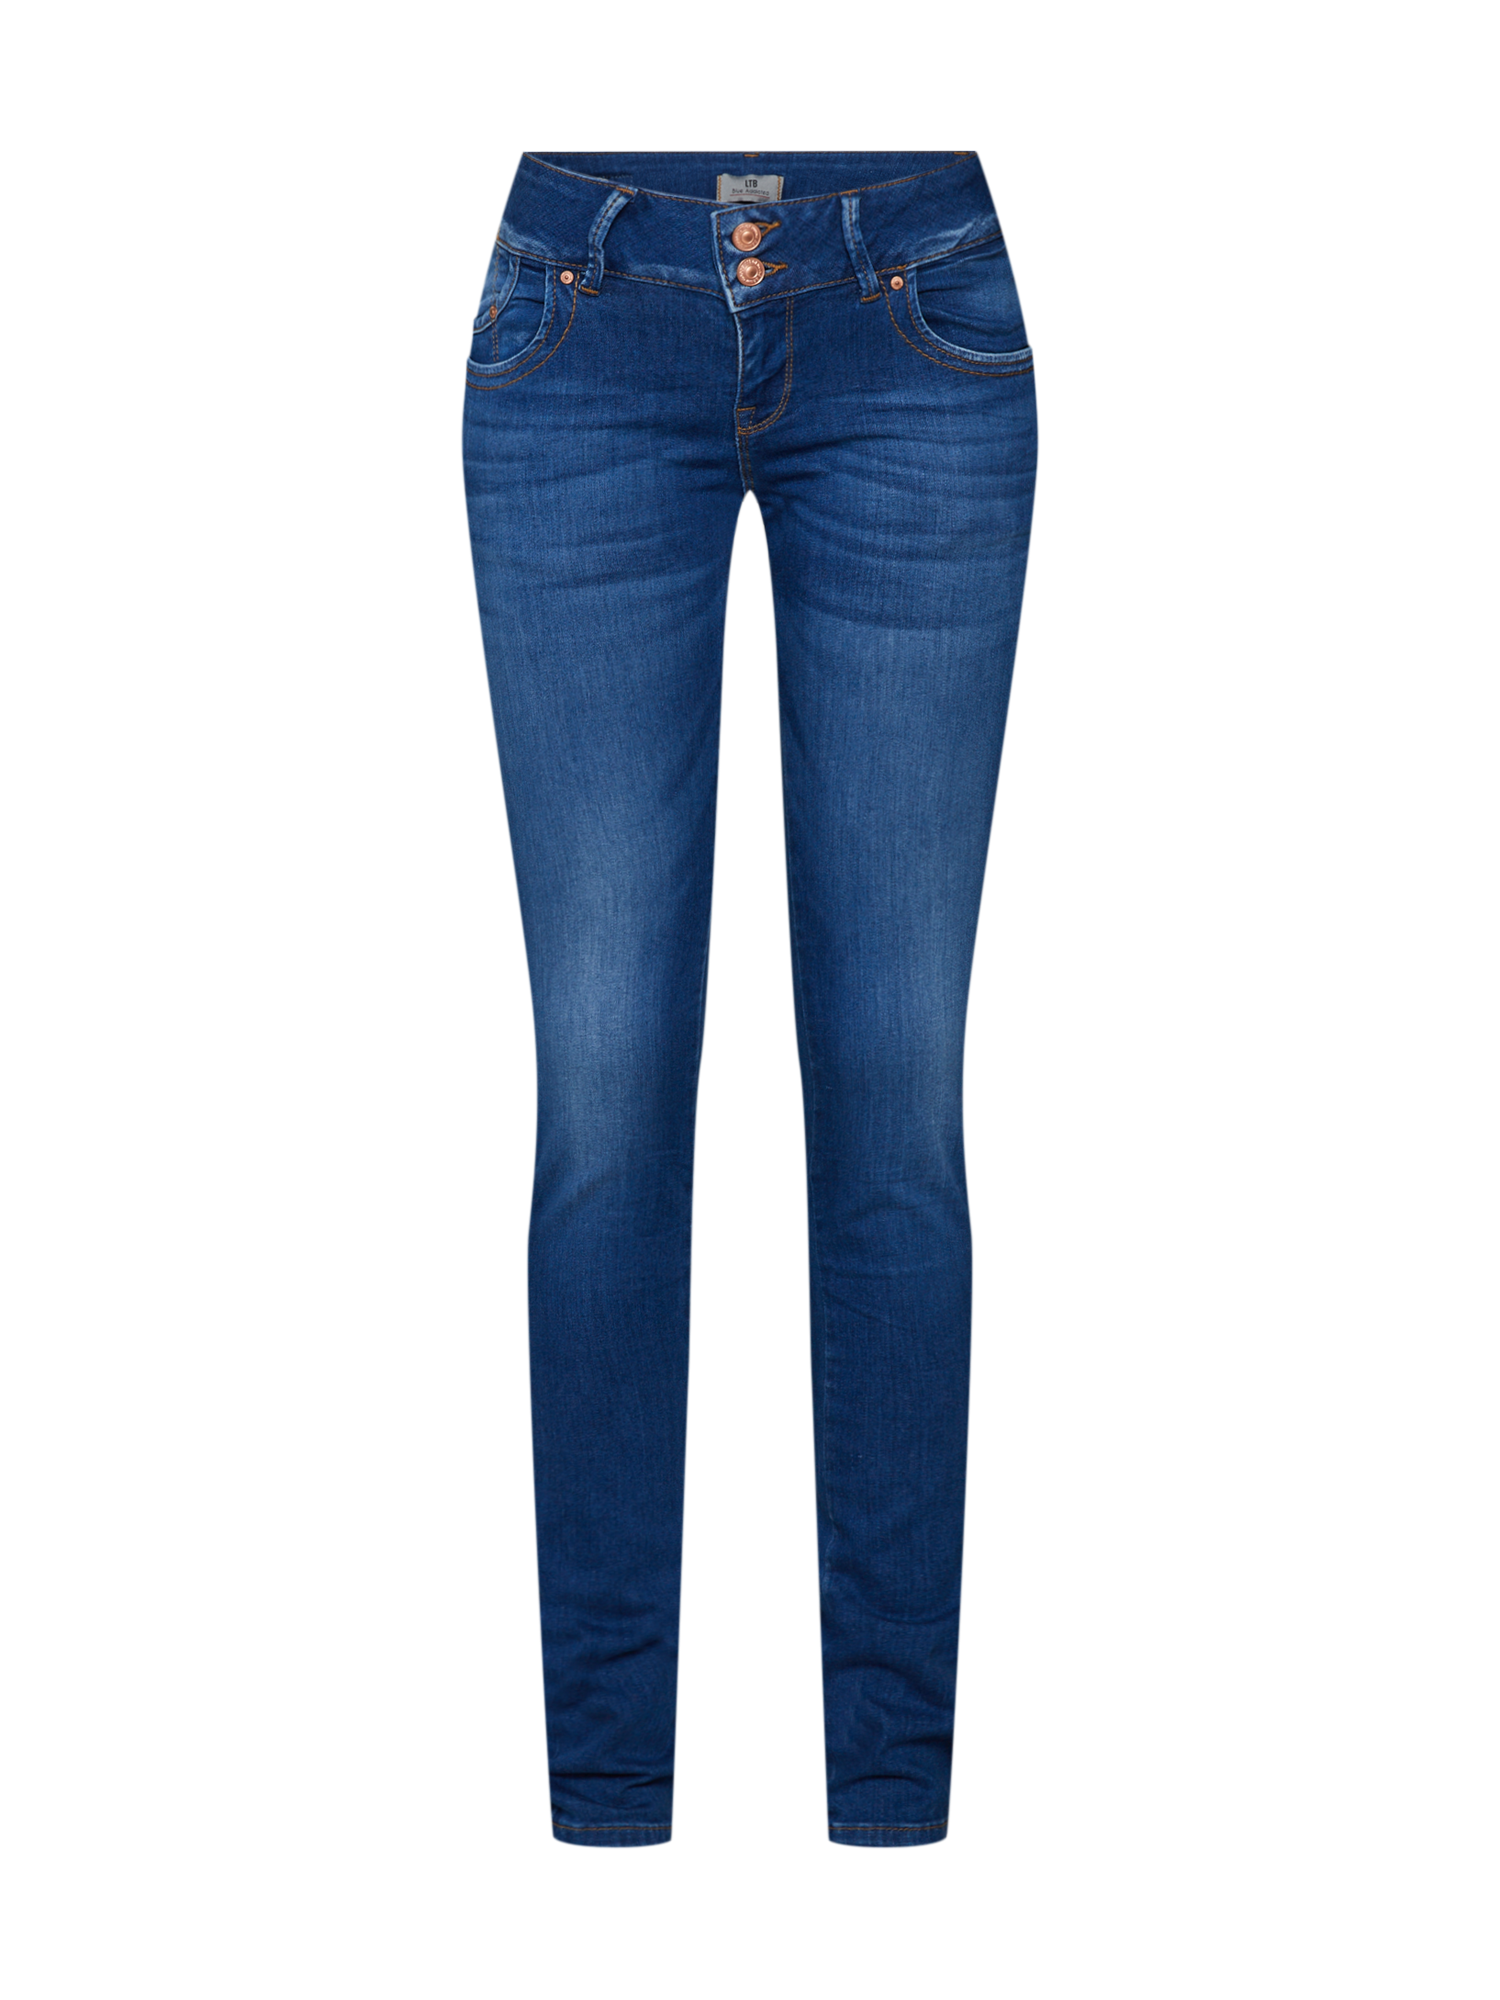 PROMO Jeans LTB Jeans Molly in Blu 